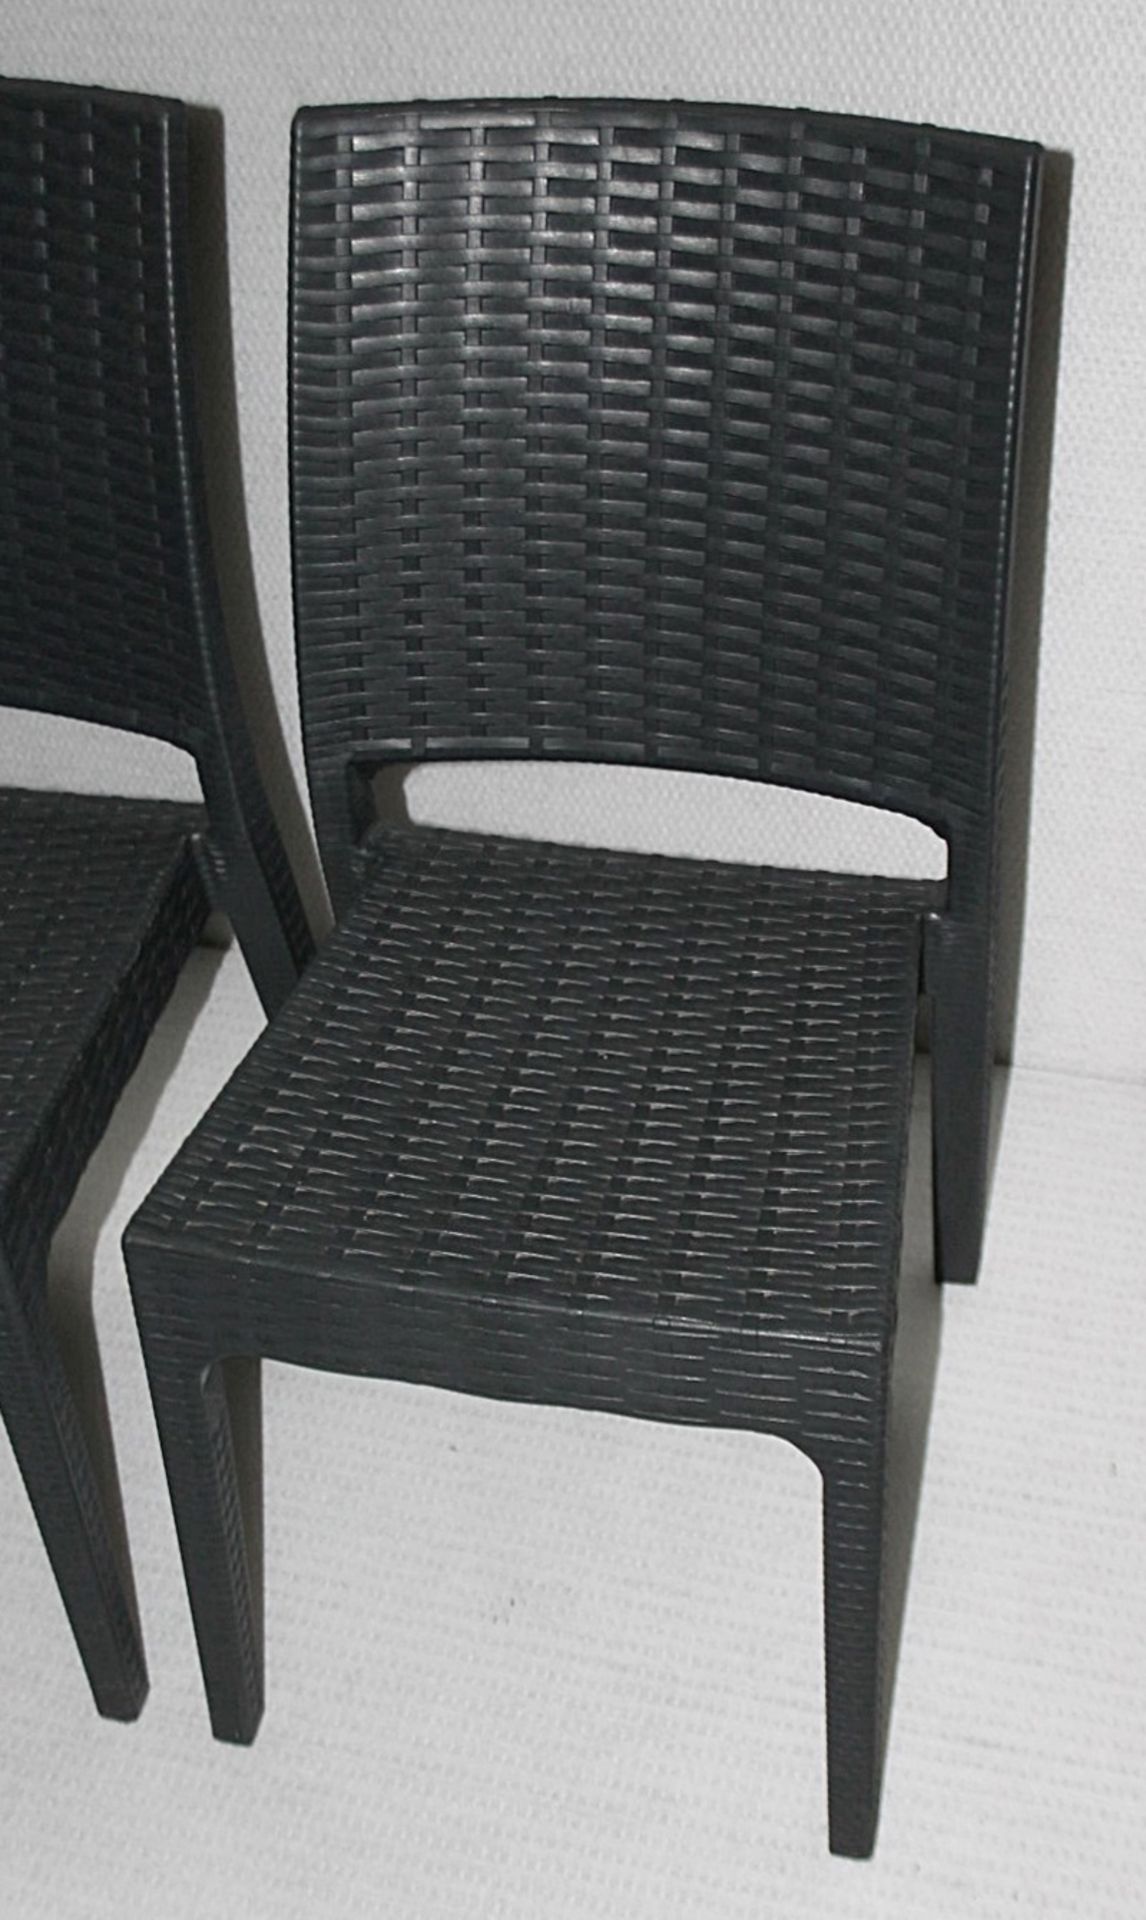 8 x SIESTA EXCLUSIVE 'Florida' Commercial Stackable Rattan-style Chairs In Dark Grey -CL987 - - Image 11 of 13